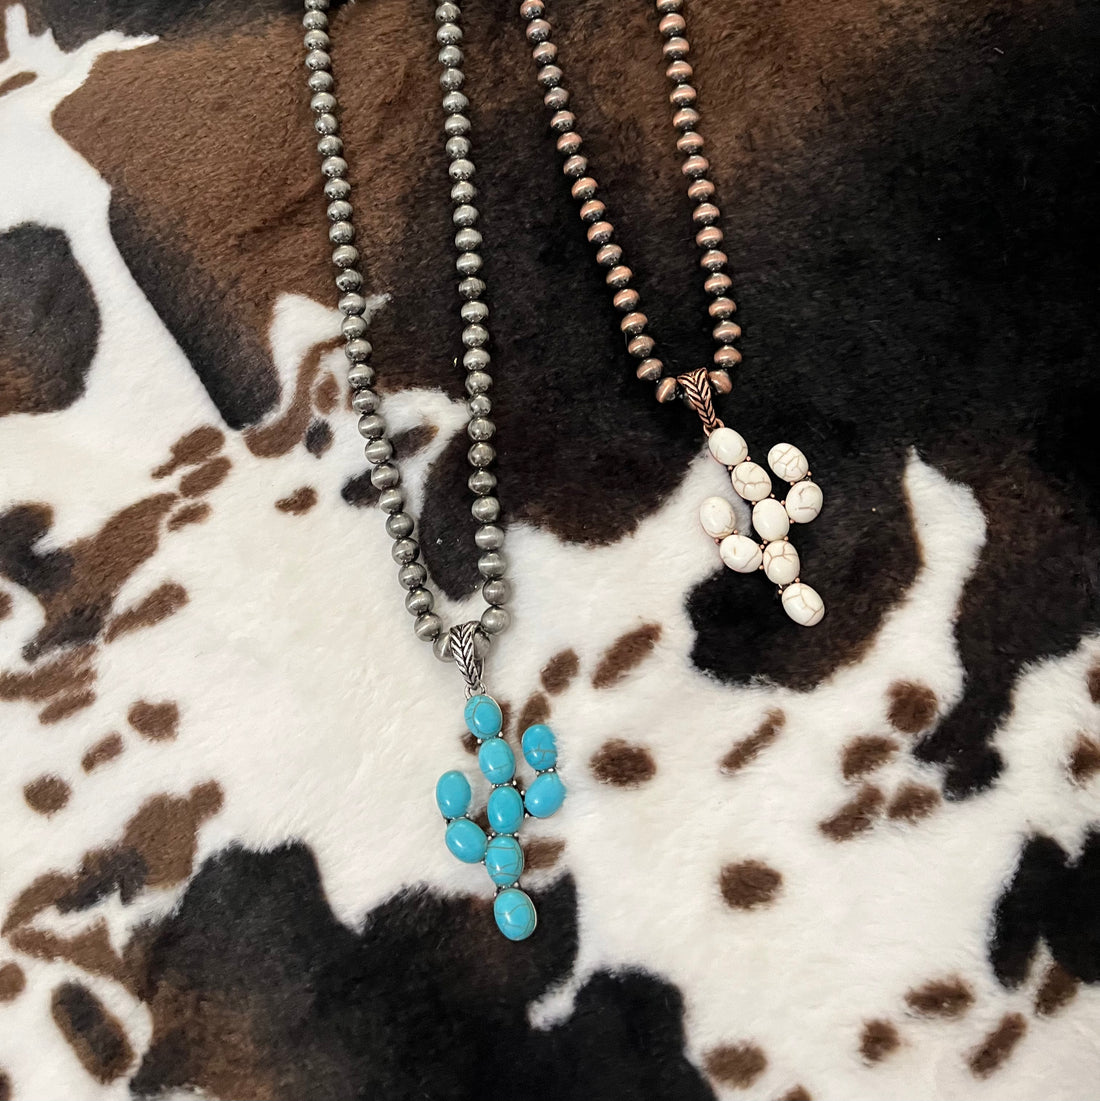 Top View of turquoise and White Cactus Necklaces